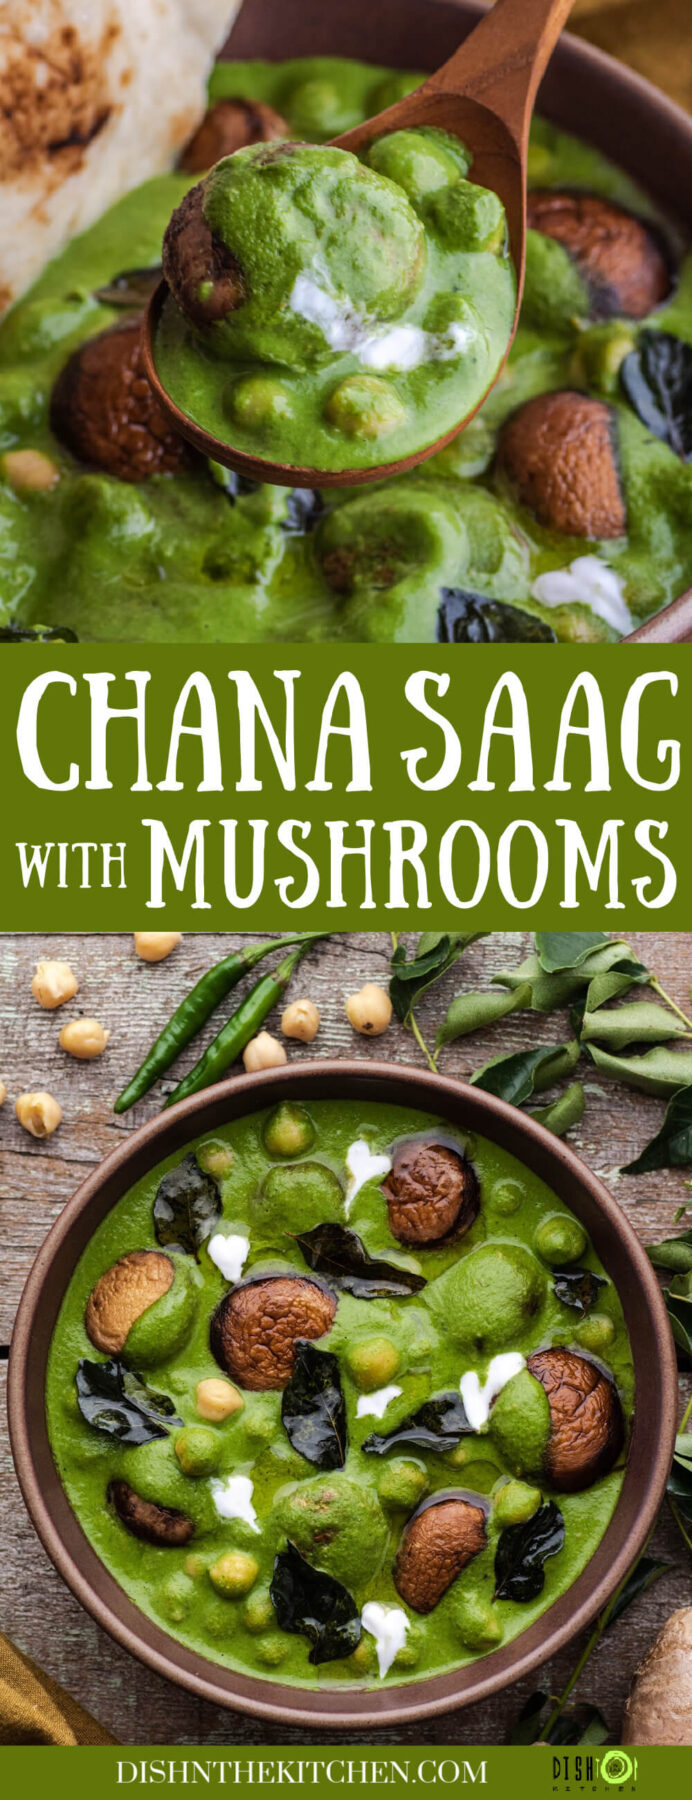 Pinterest image of a vibrant green chana saag with mushrooms, chickpeas, fried curry leaves, and drizzles of coconut cream in a brown bowl.